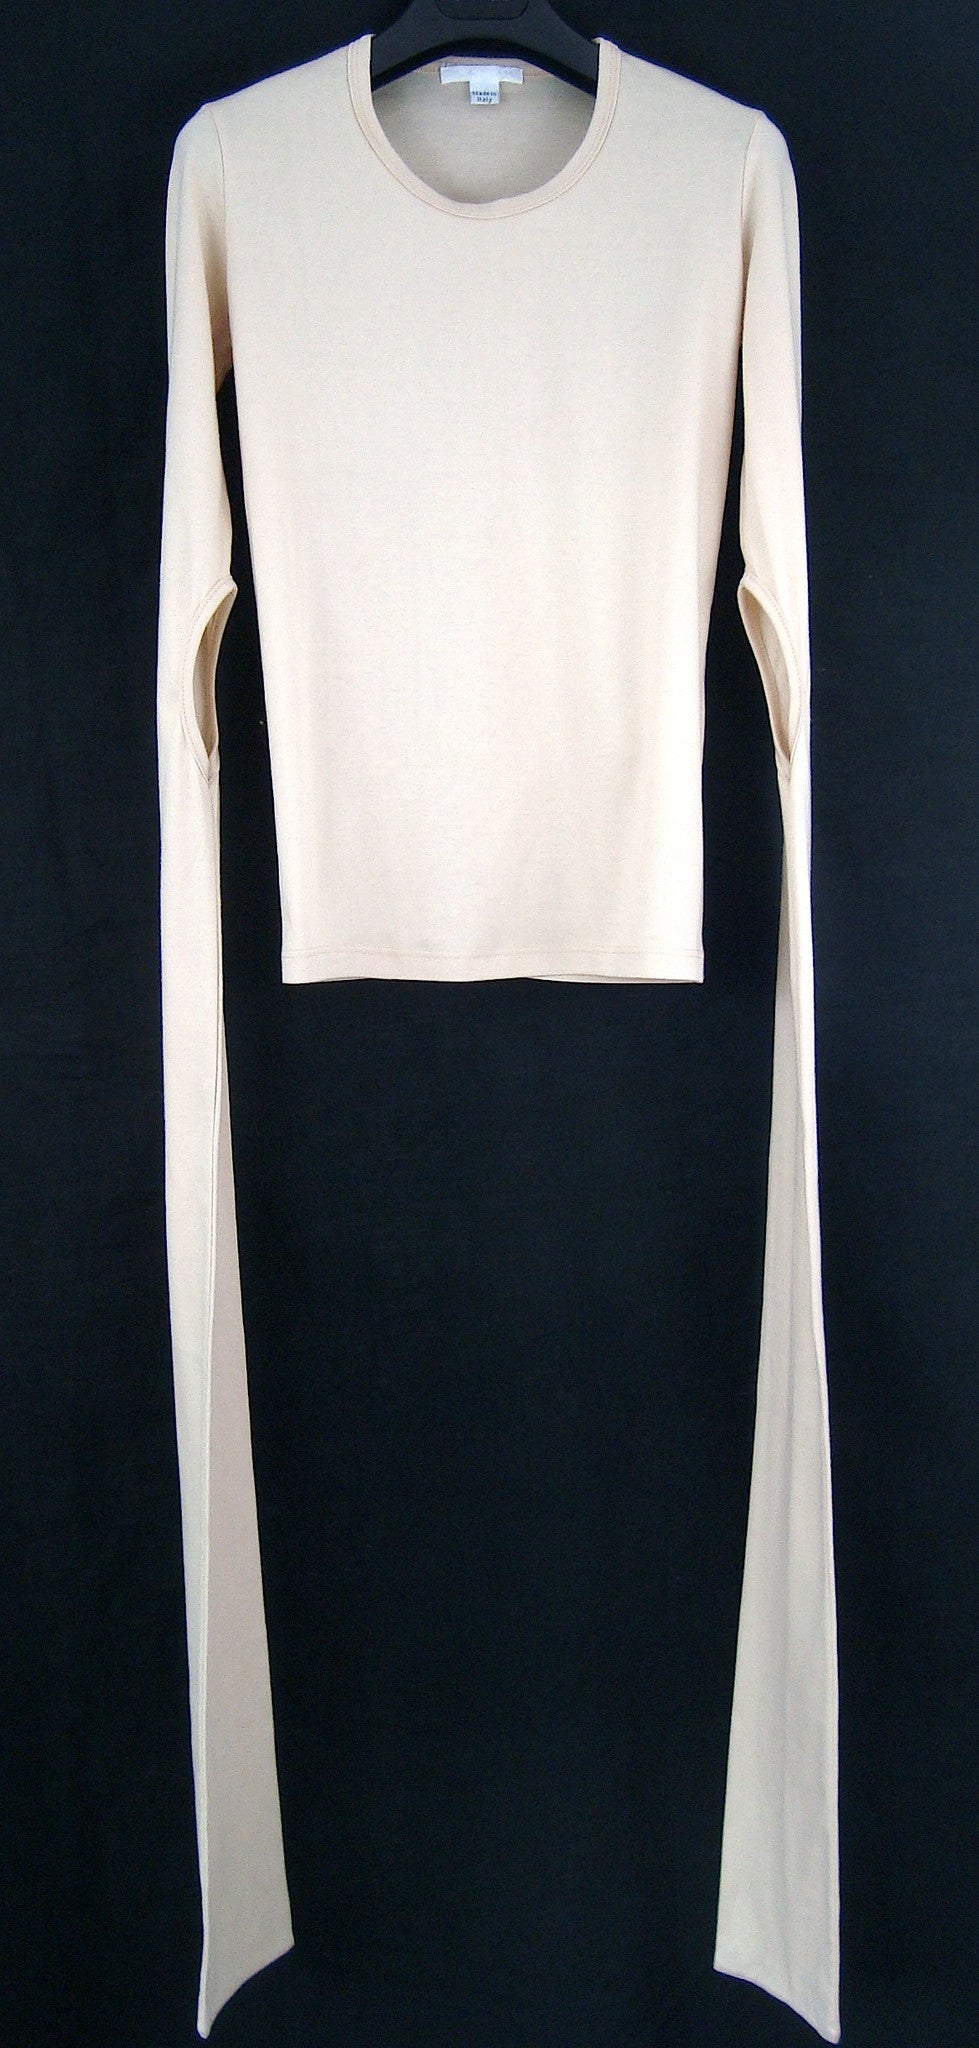 1998 Elongated Sleeve T-Shirt with Cut-Outs